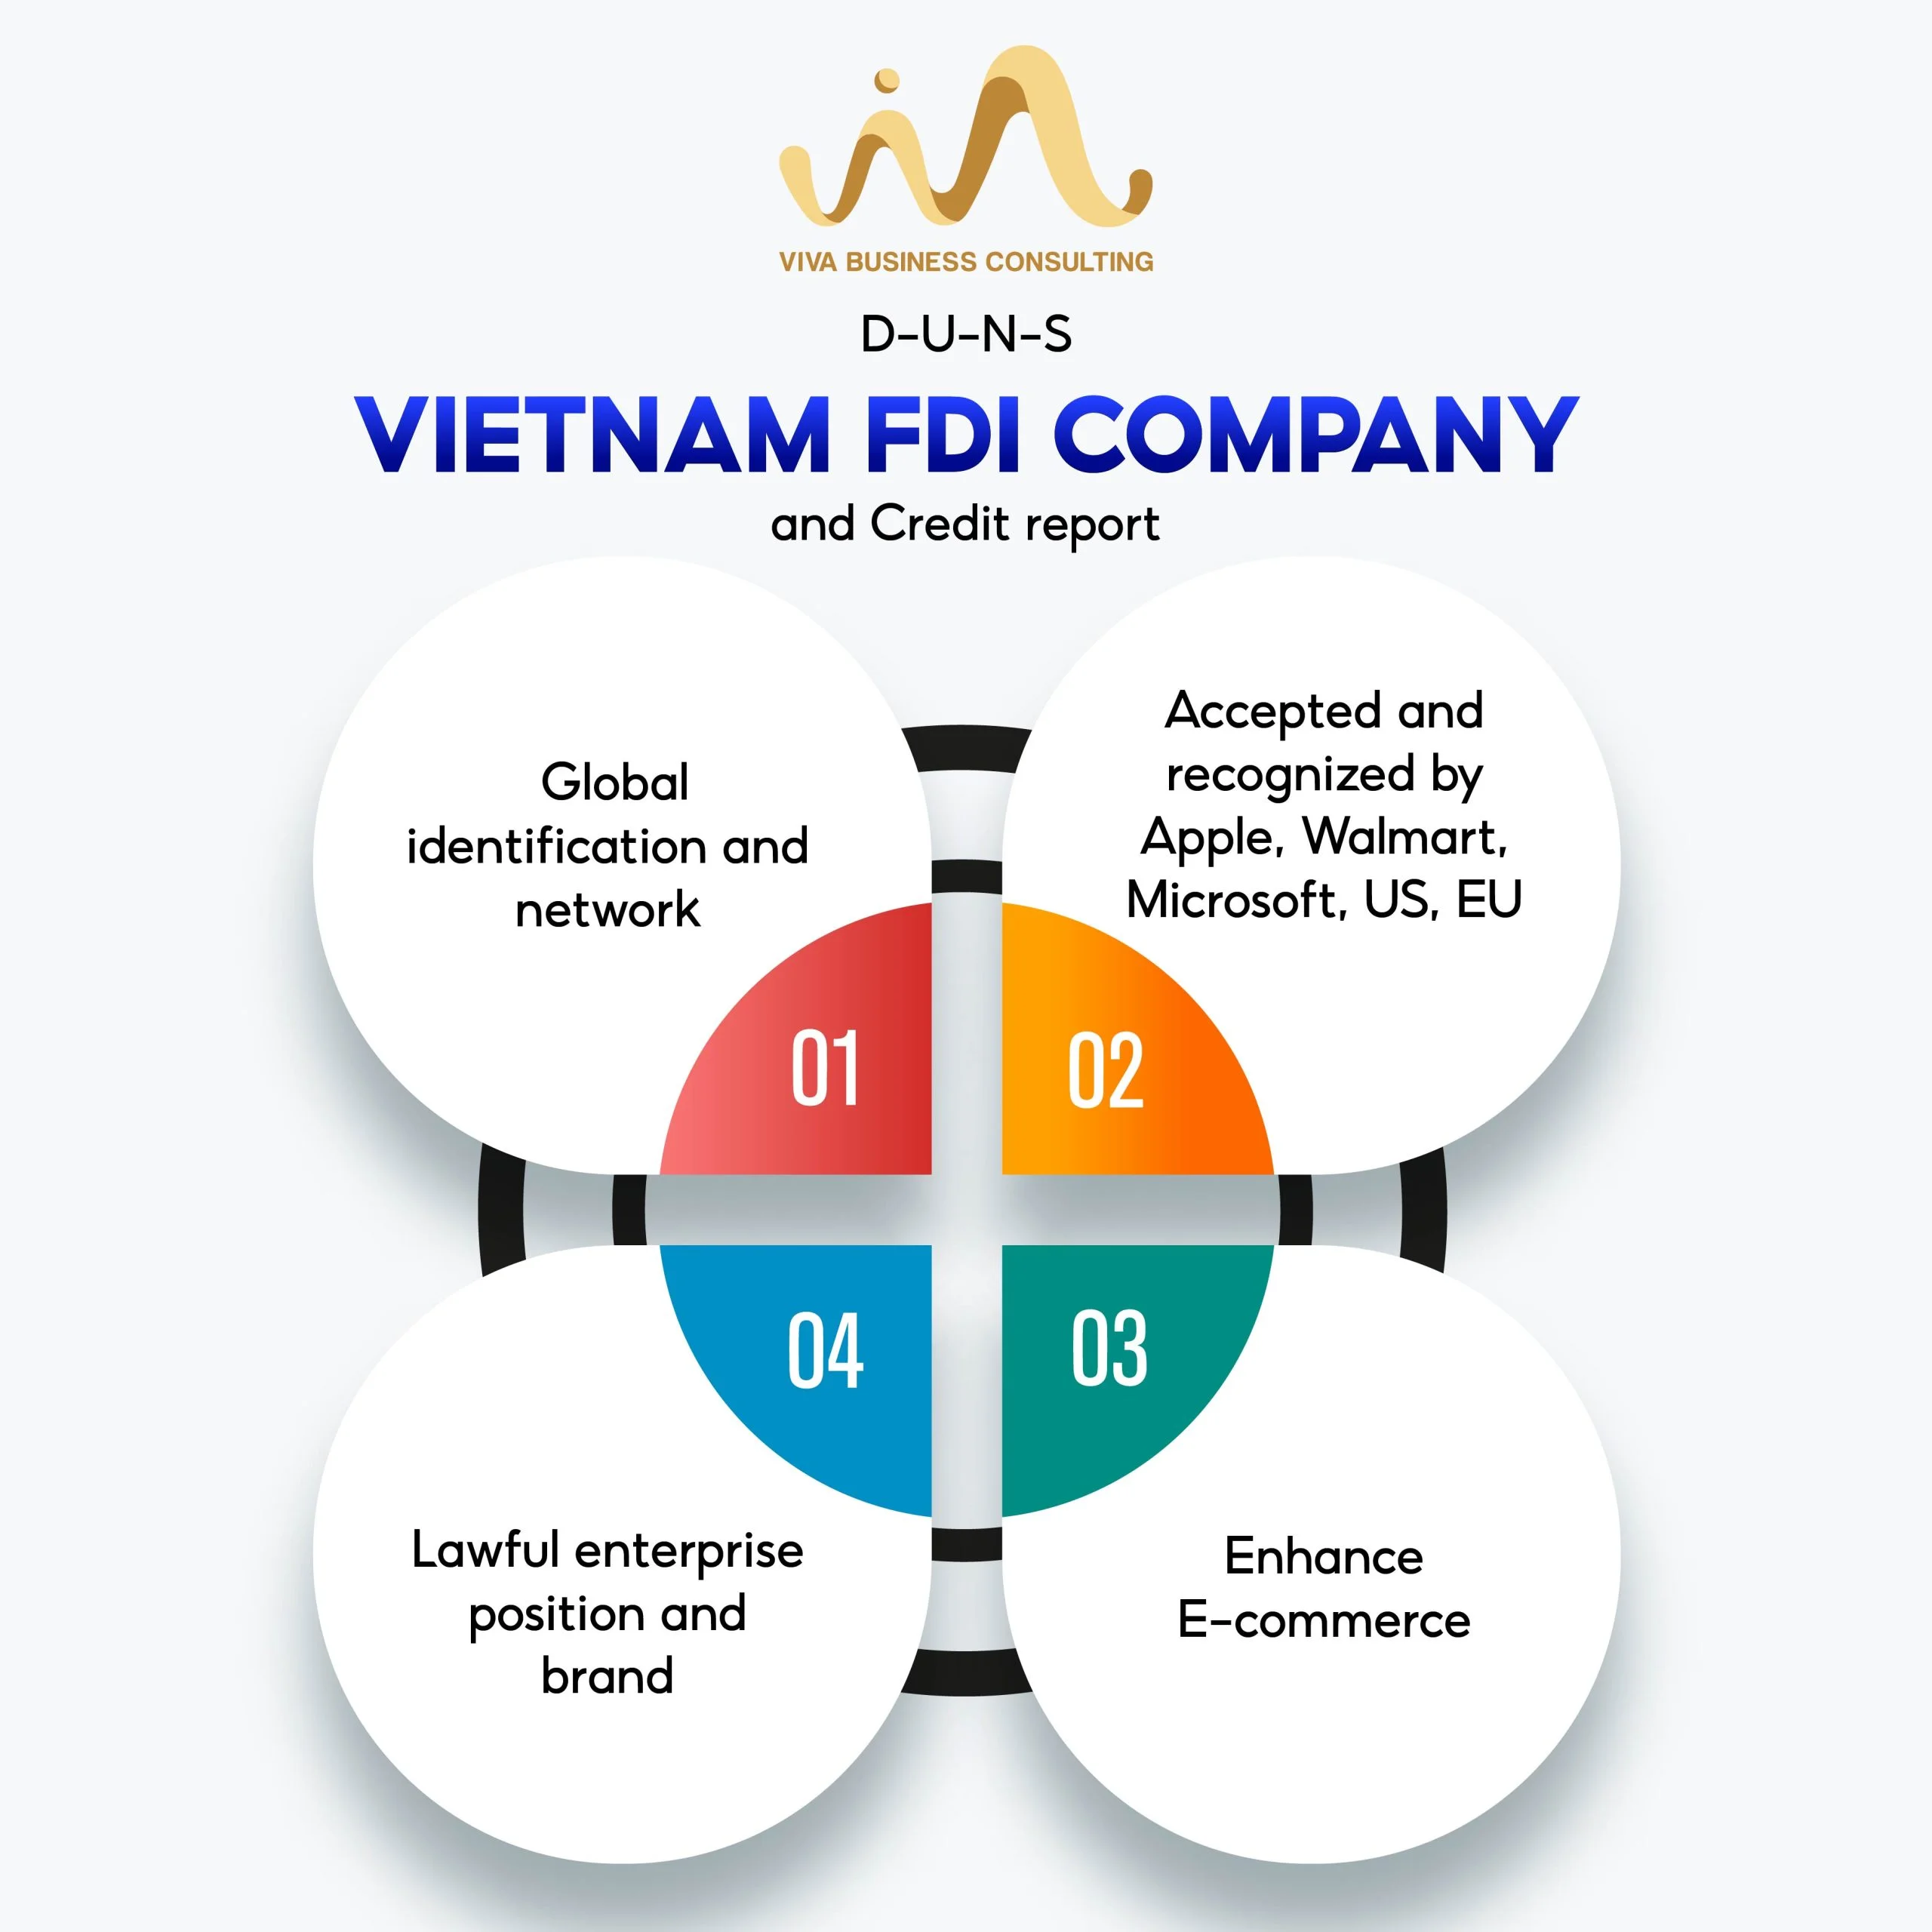 DUNS number and FDI company in Vietnam